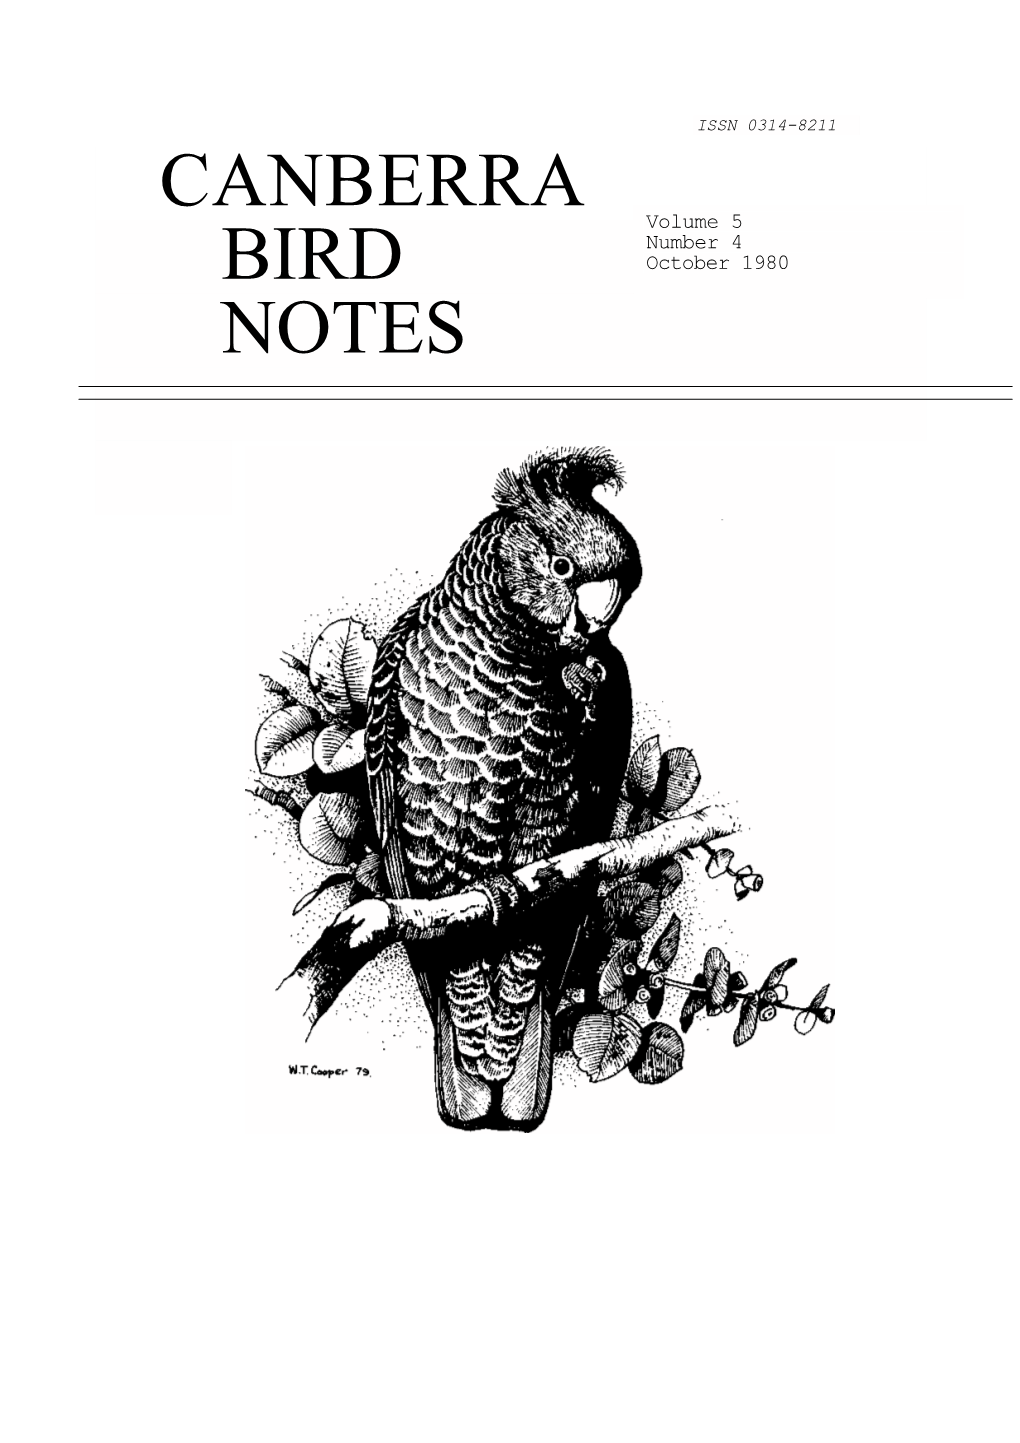 Canberra Bird Notes Have Carried Articles Larger Than Usual; This Has Had the Effect of Delaying Publication of a Multitude of Small Papers from Our Members